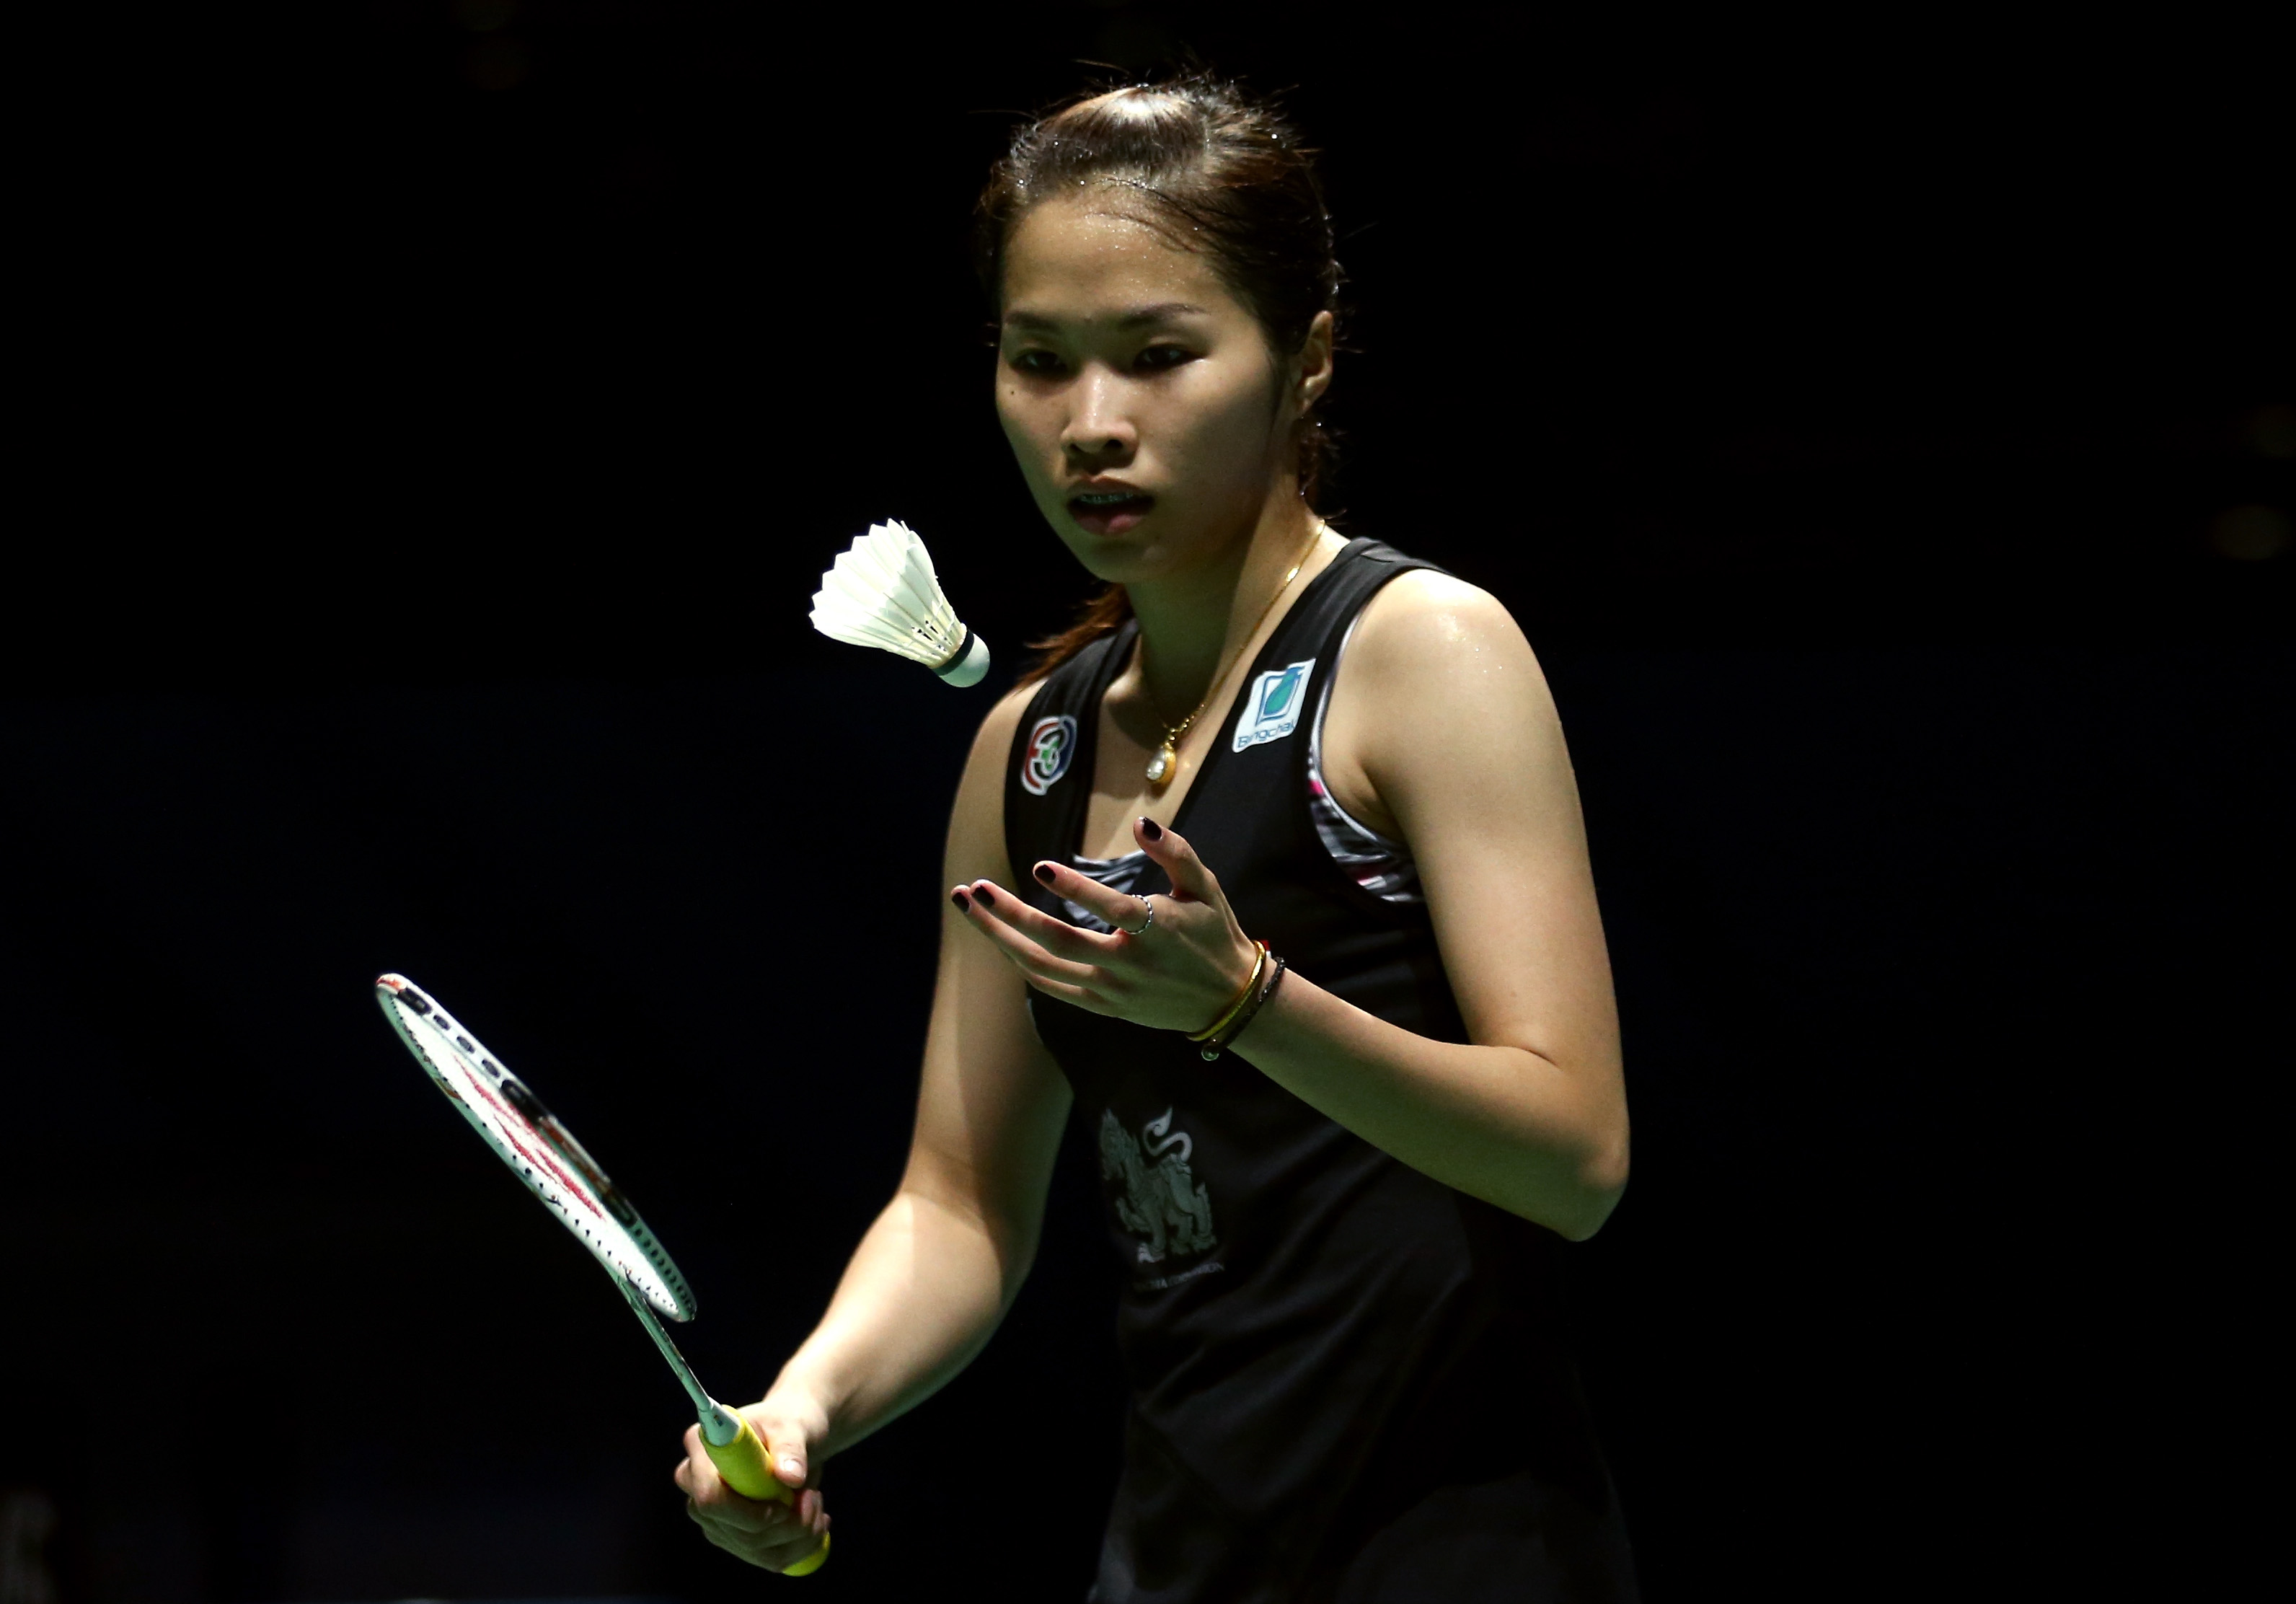 World No.4 Ratchanok Intanon cleared of anti-doping violation